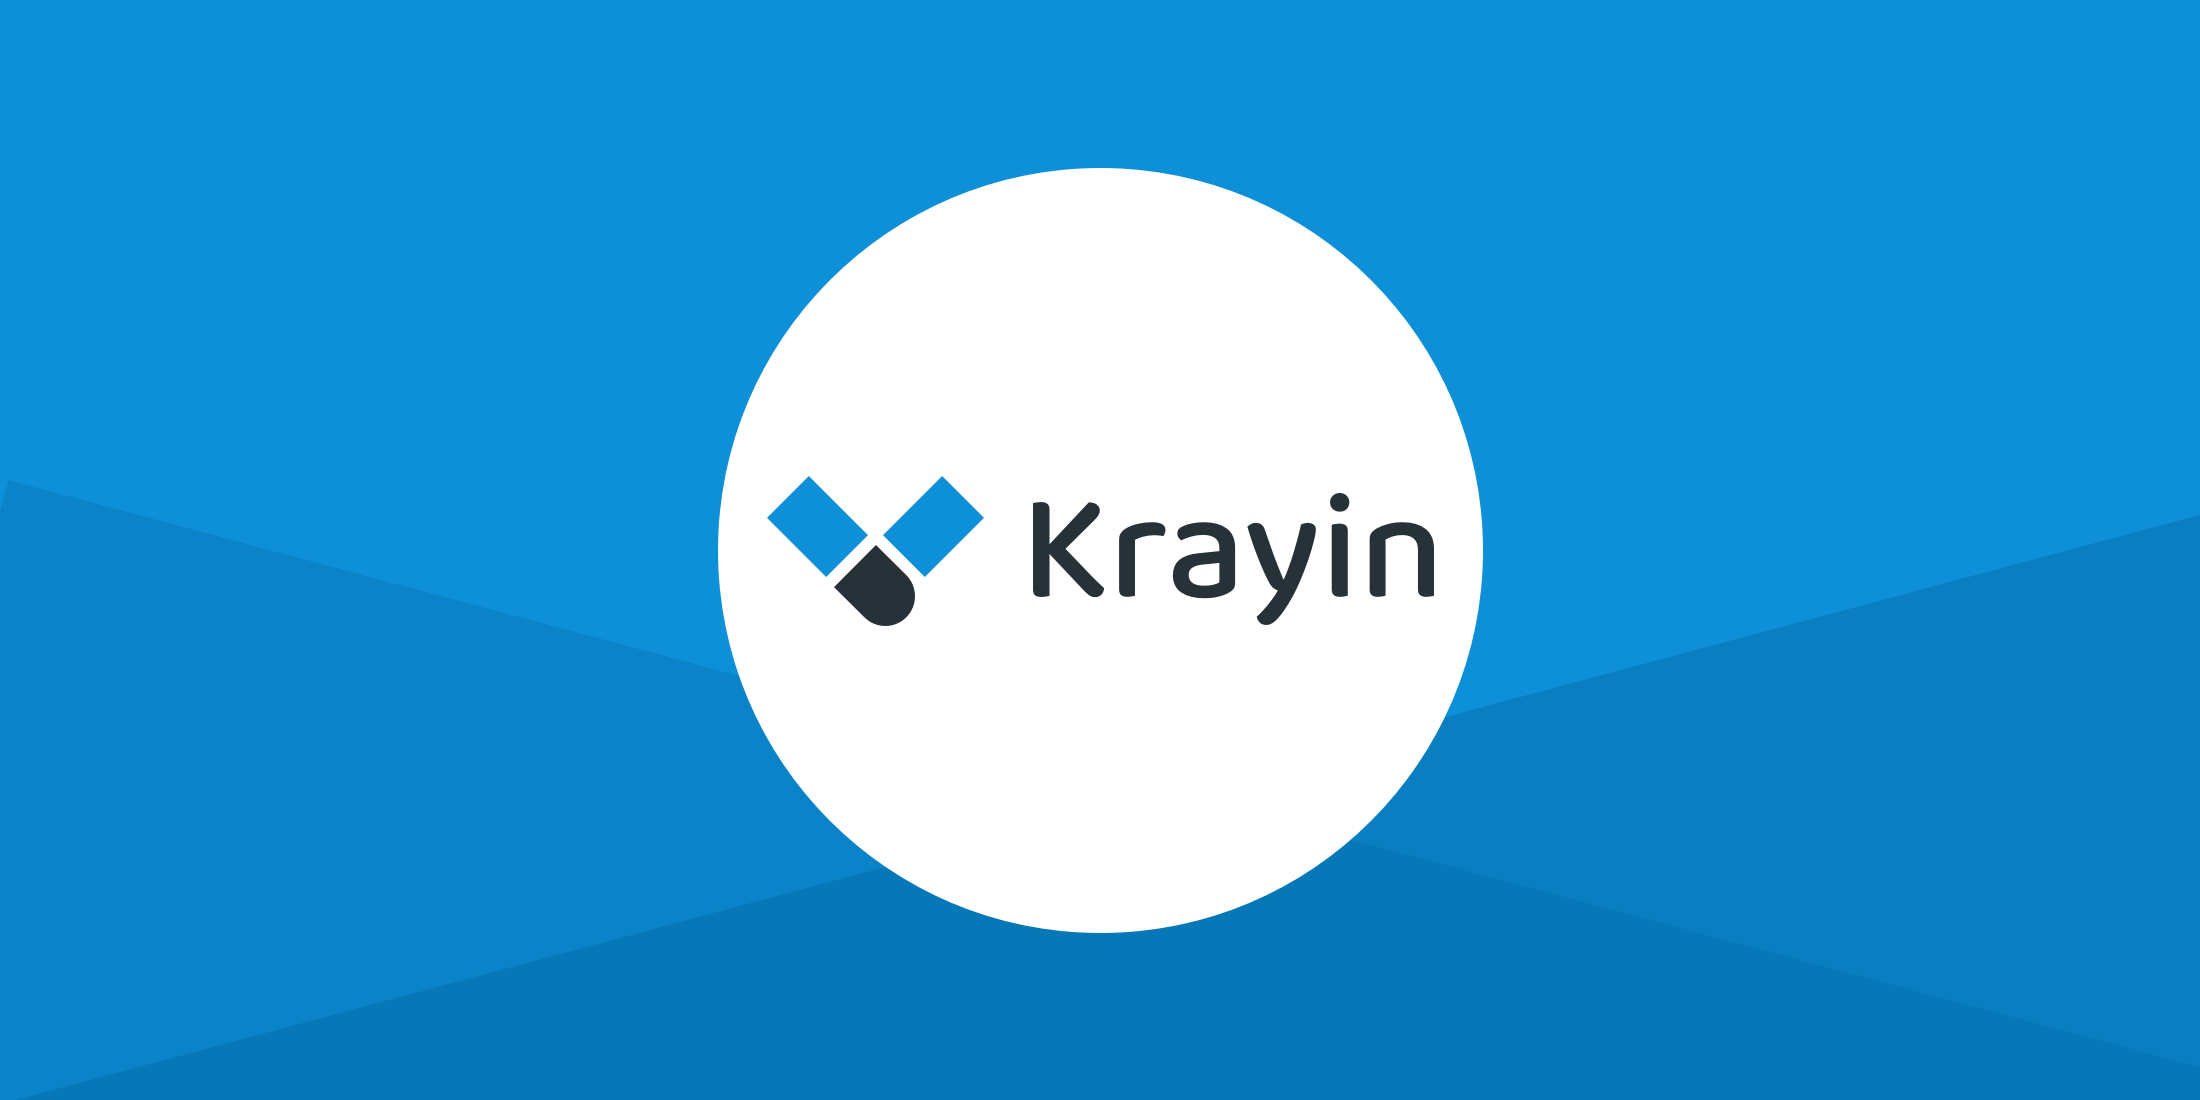 Krayin is an Open-Source CRM Built with Laravel image